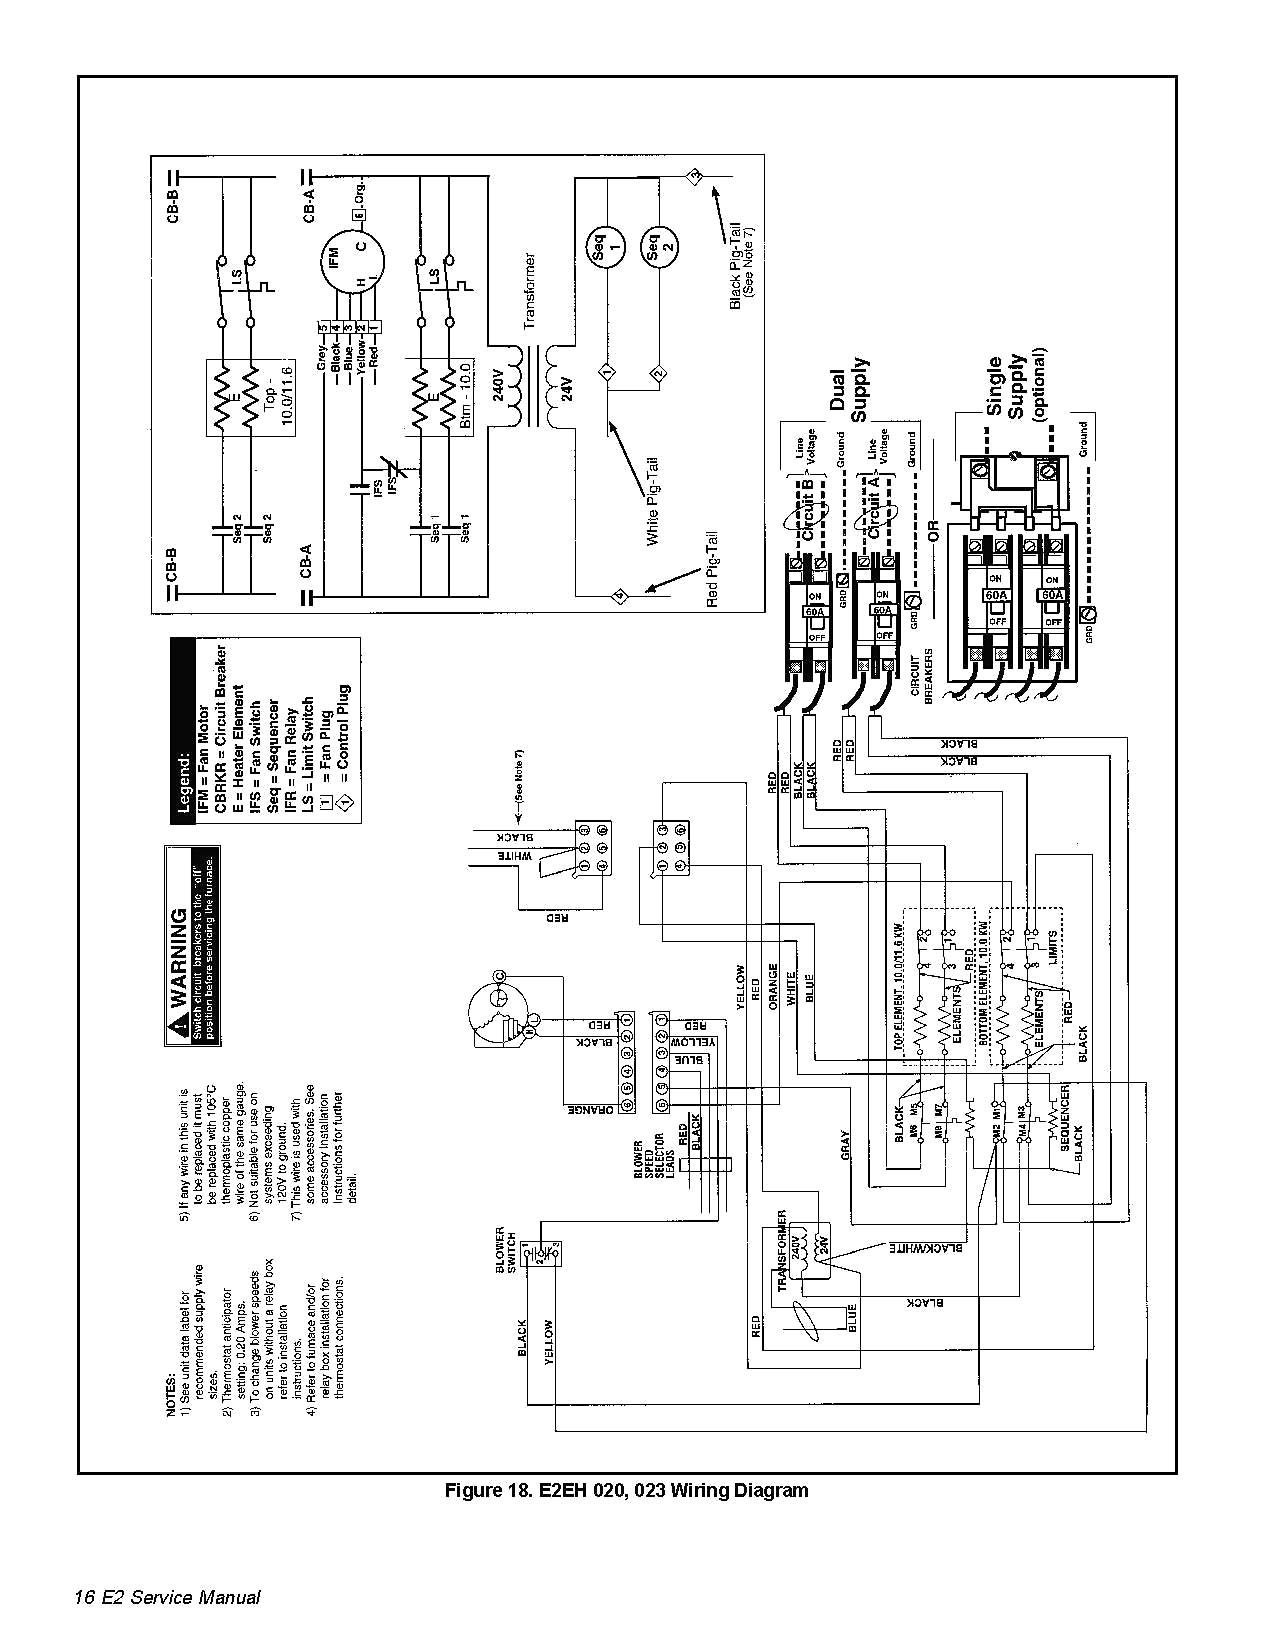 Lennox Furnace Wiring Diagram Recent Electric Furnace Wire Diagram Intertherm Mobile Home Schematic